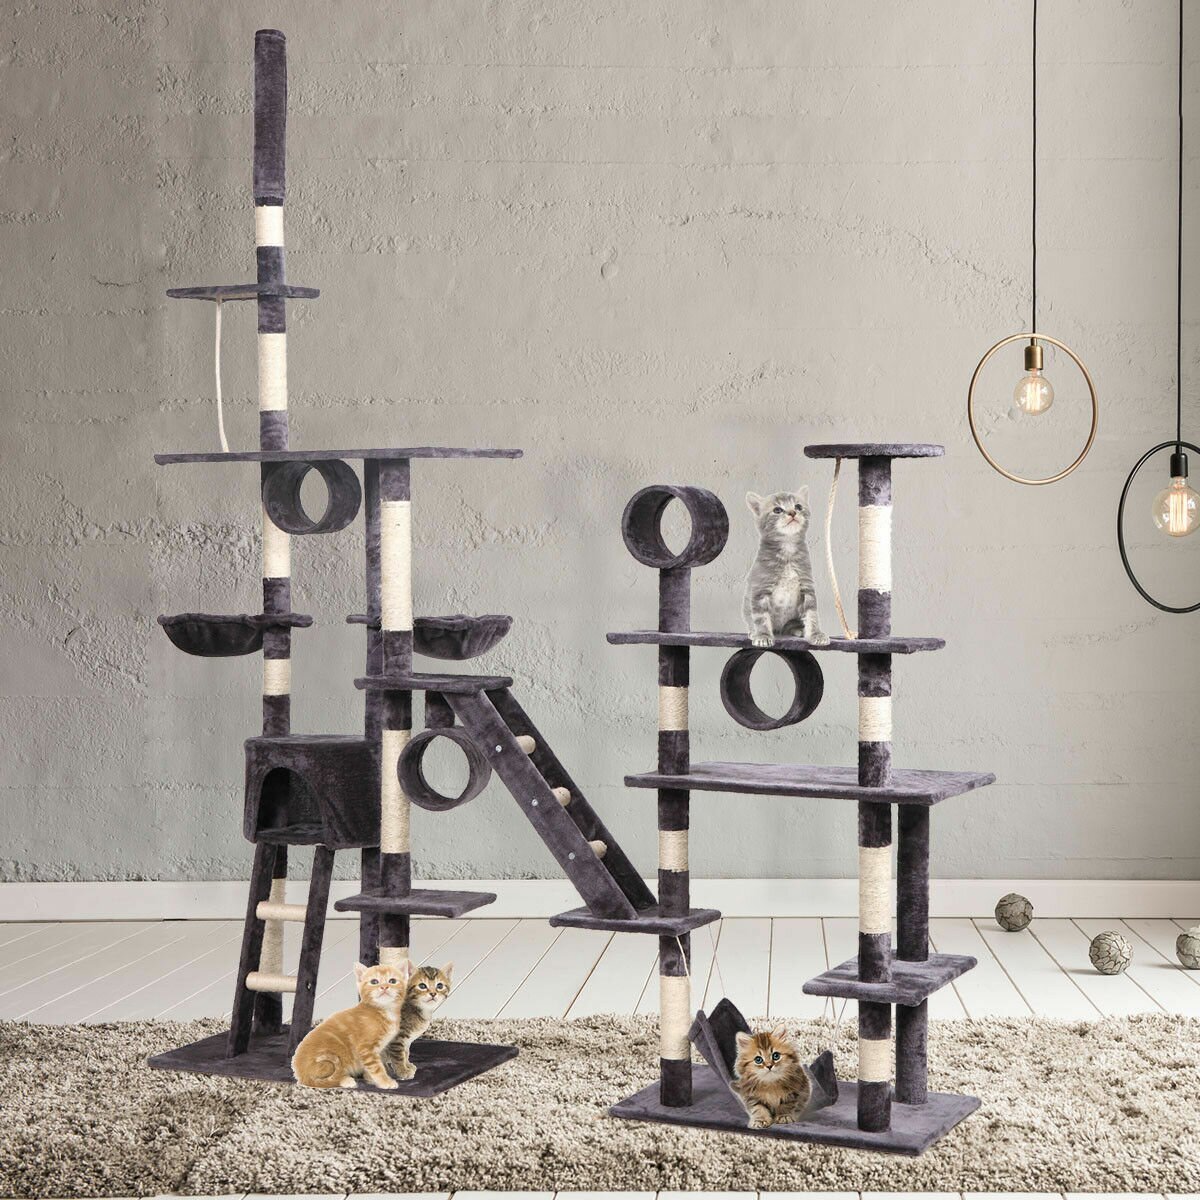 Biggest cat tree to spoil your kittens